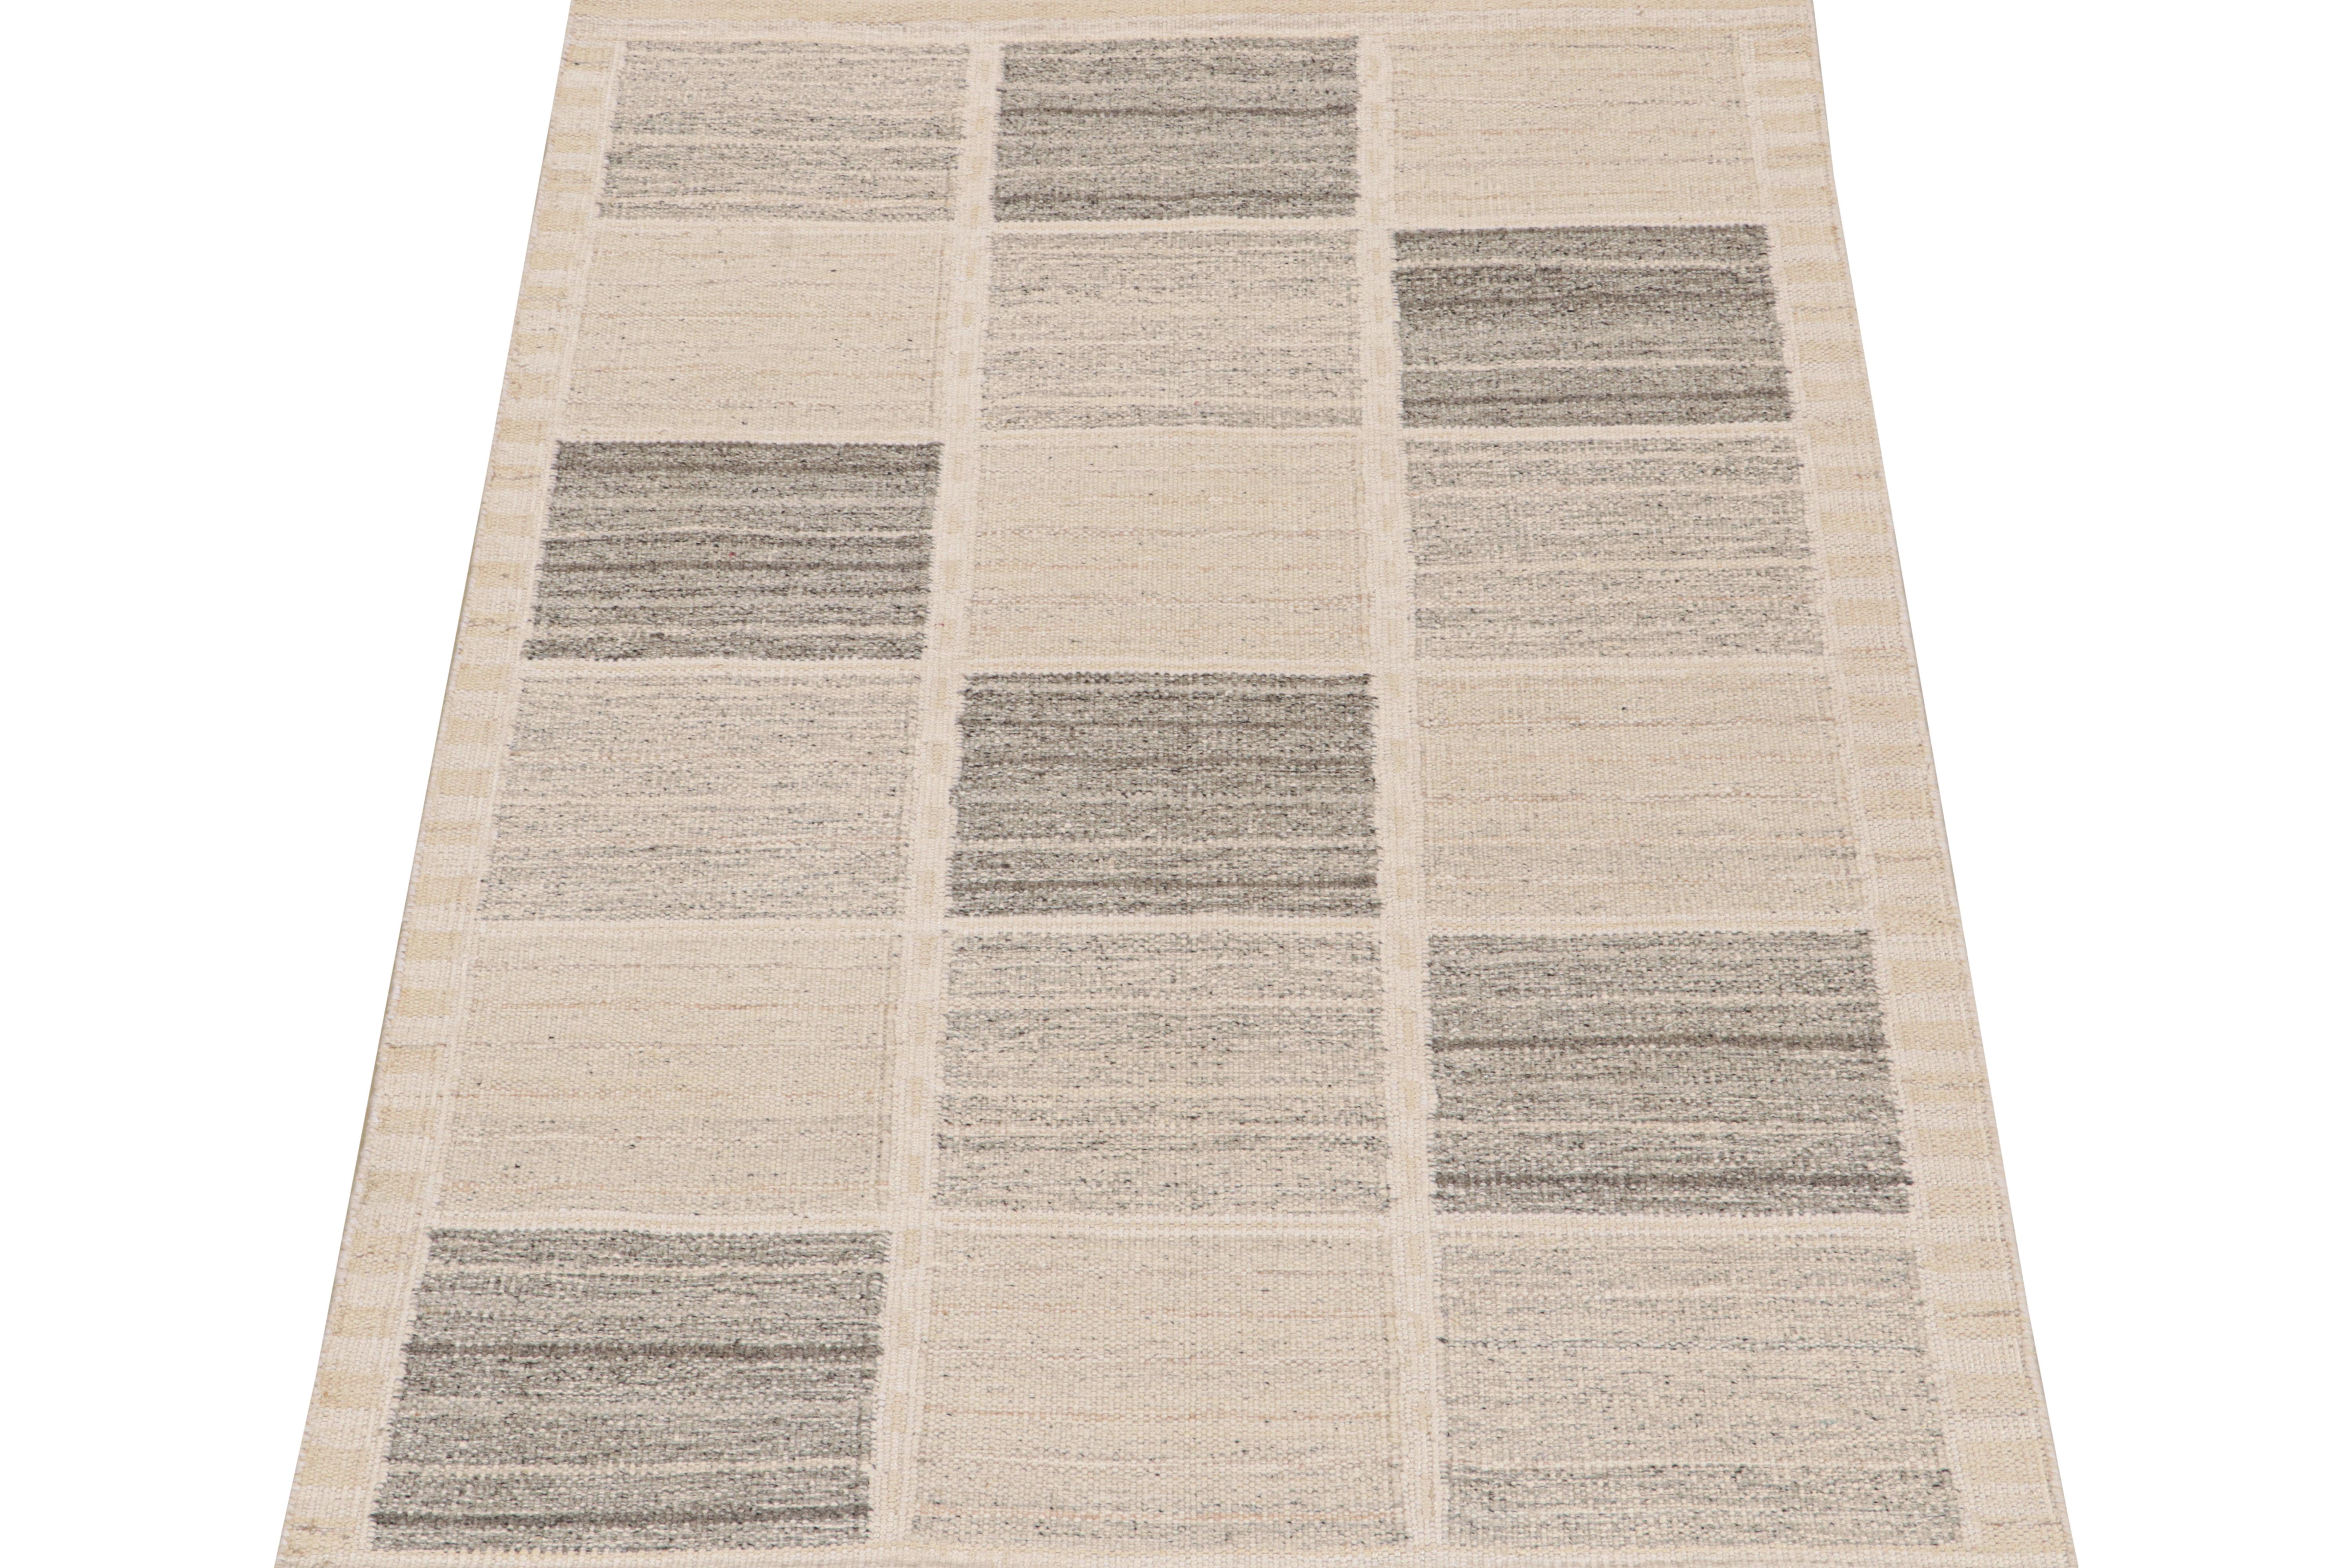 This 5x7 flat weave is a new addition to the Scandinavian Kilim collection by Rug & Kilim. Handwoven in wool and natural yarns, its design reflects a contemporary take on mid-century Rollakans and Swedish Deco style.

On the Design:

This new